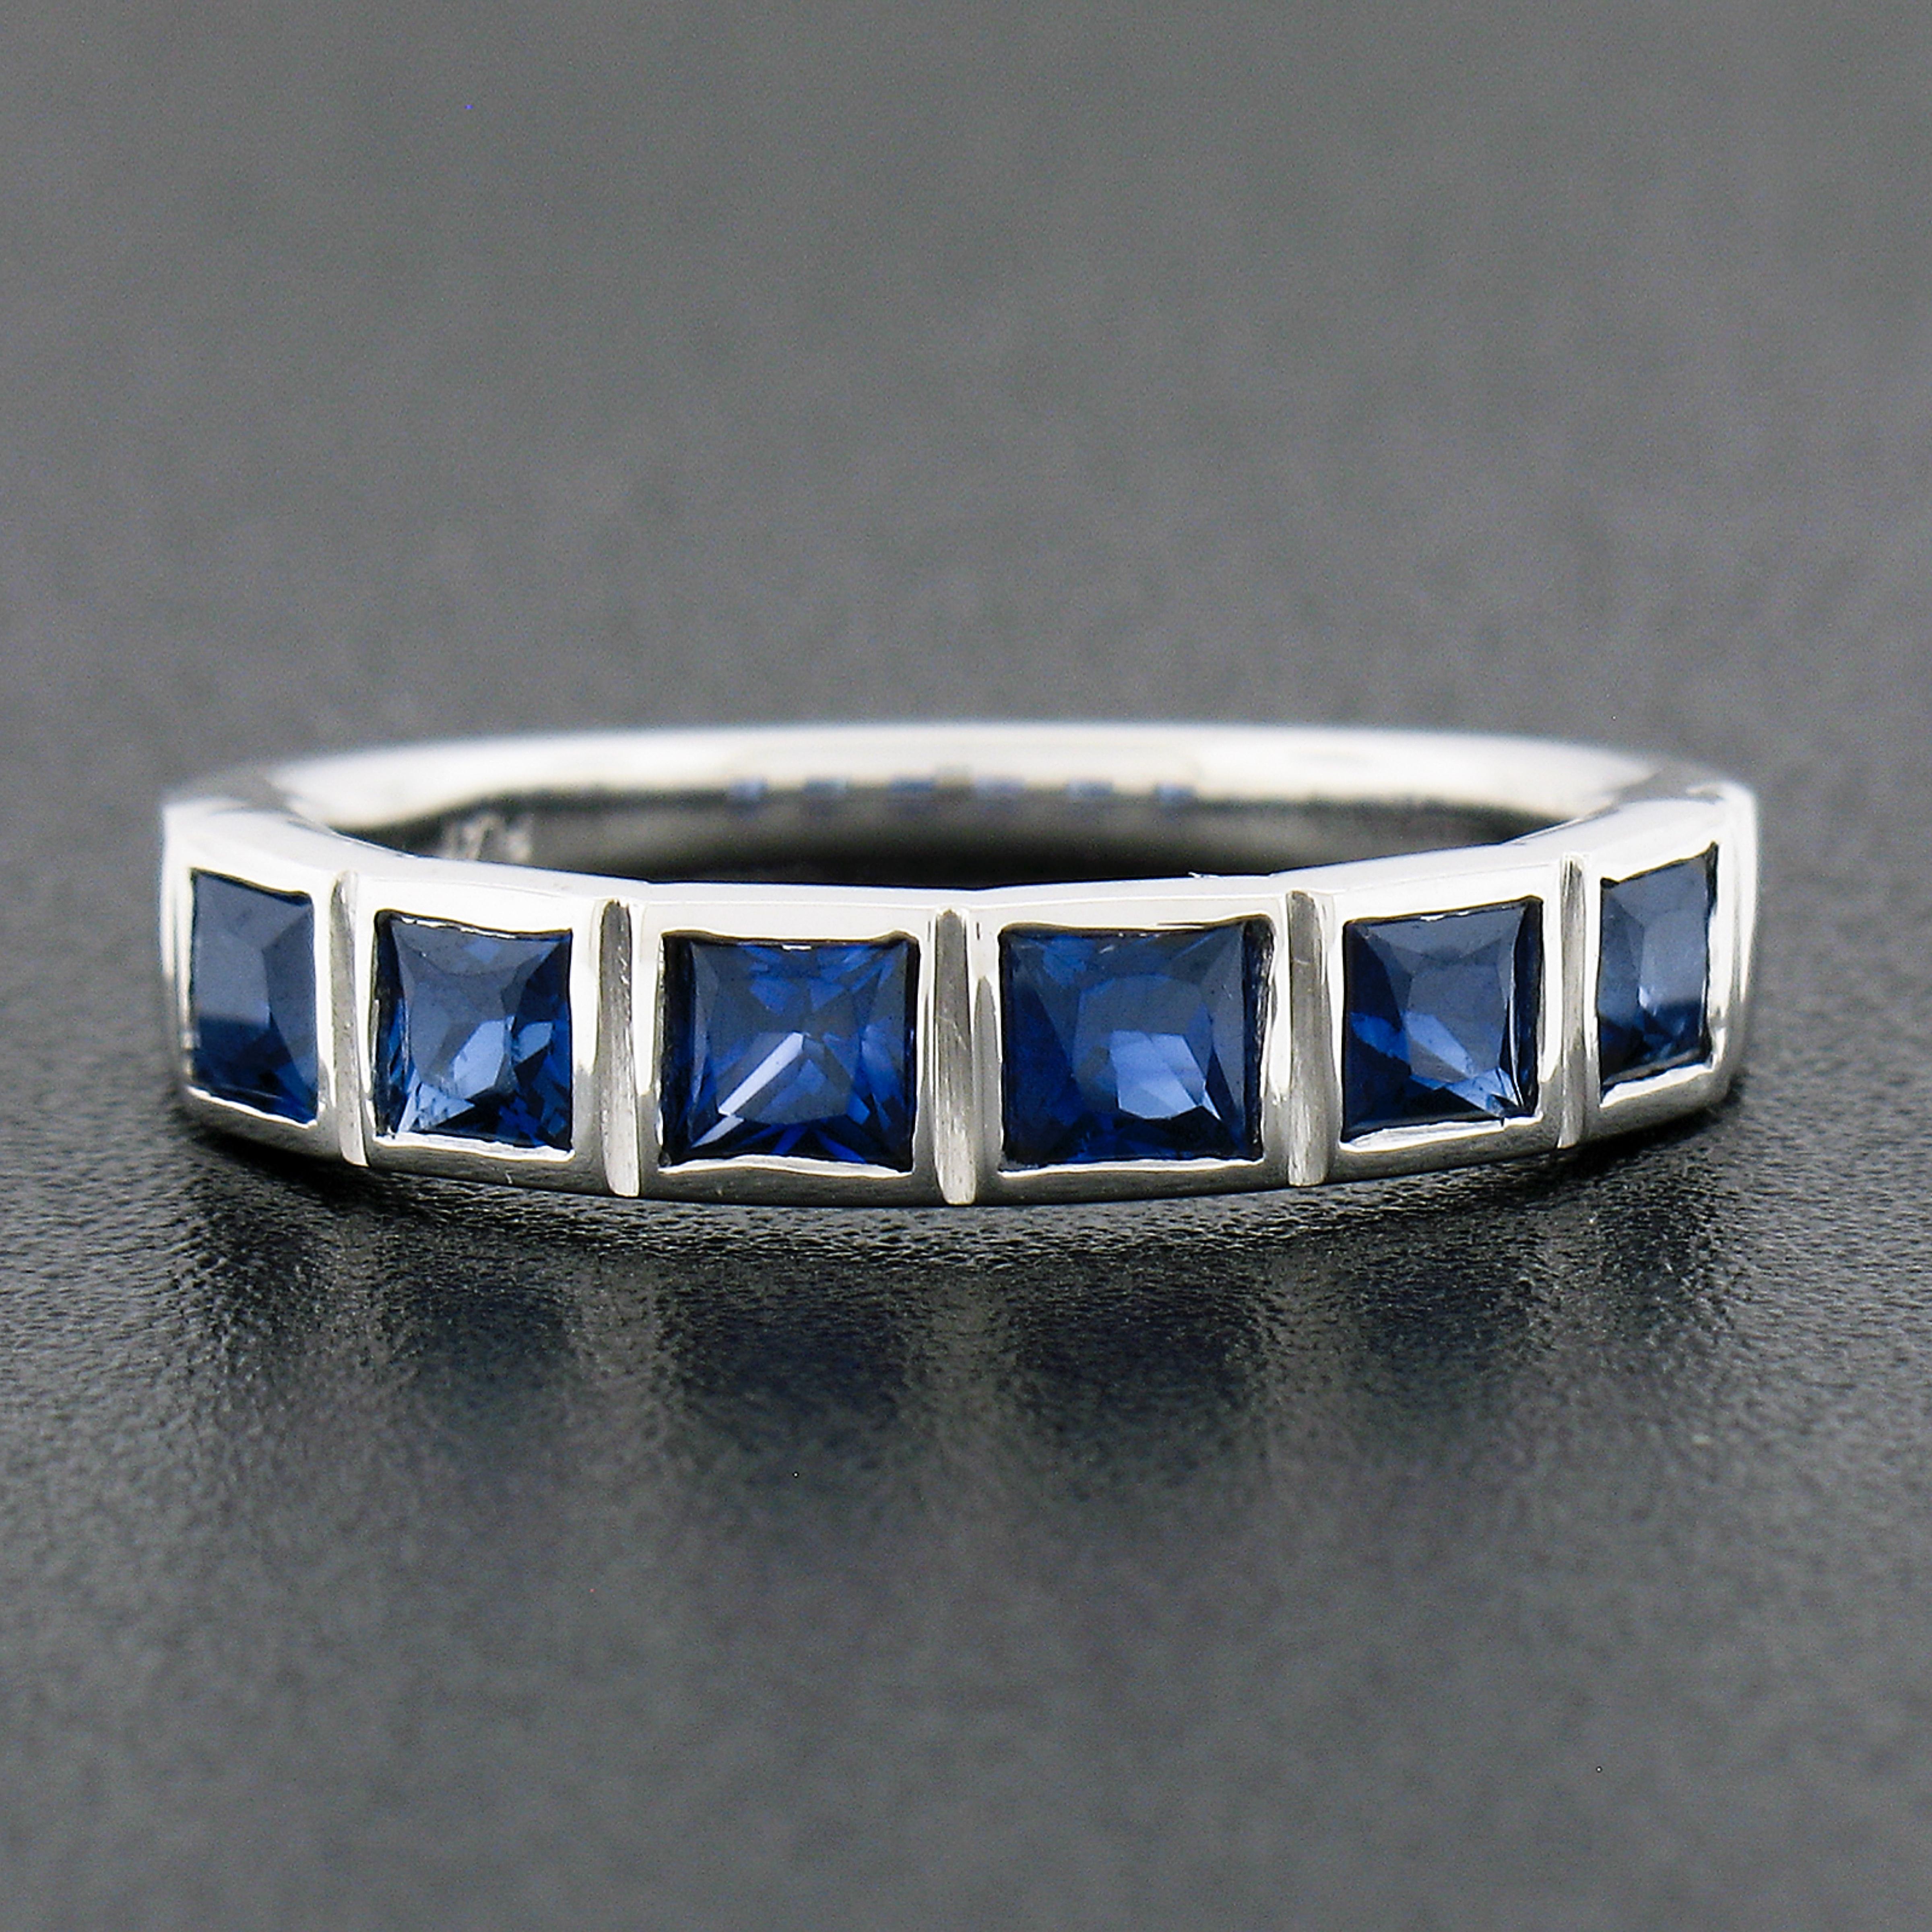 This magnificent and very well made band ring is newly crafted in solid platinum and features 6 genuine sapphire stones neatly and individually bezel set across the top. These fine sapphires are square step cut, totaling exactly 1.18 carats in